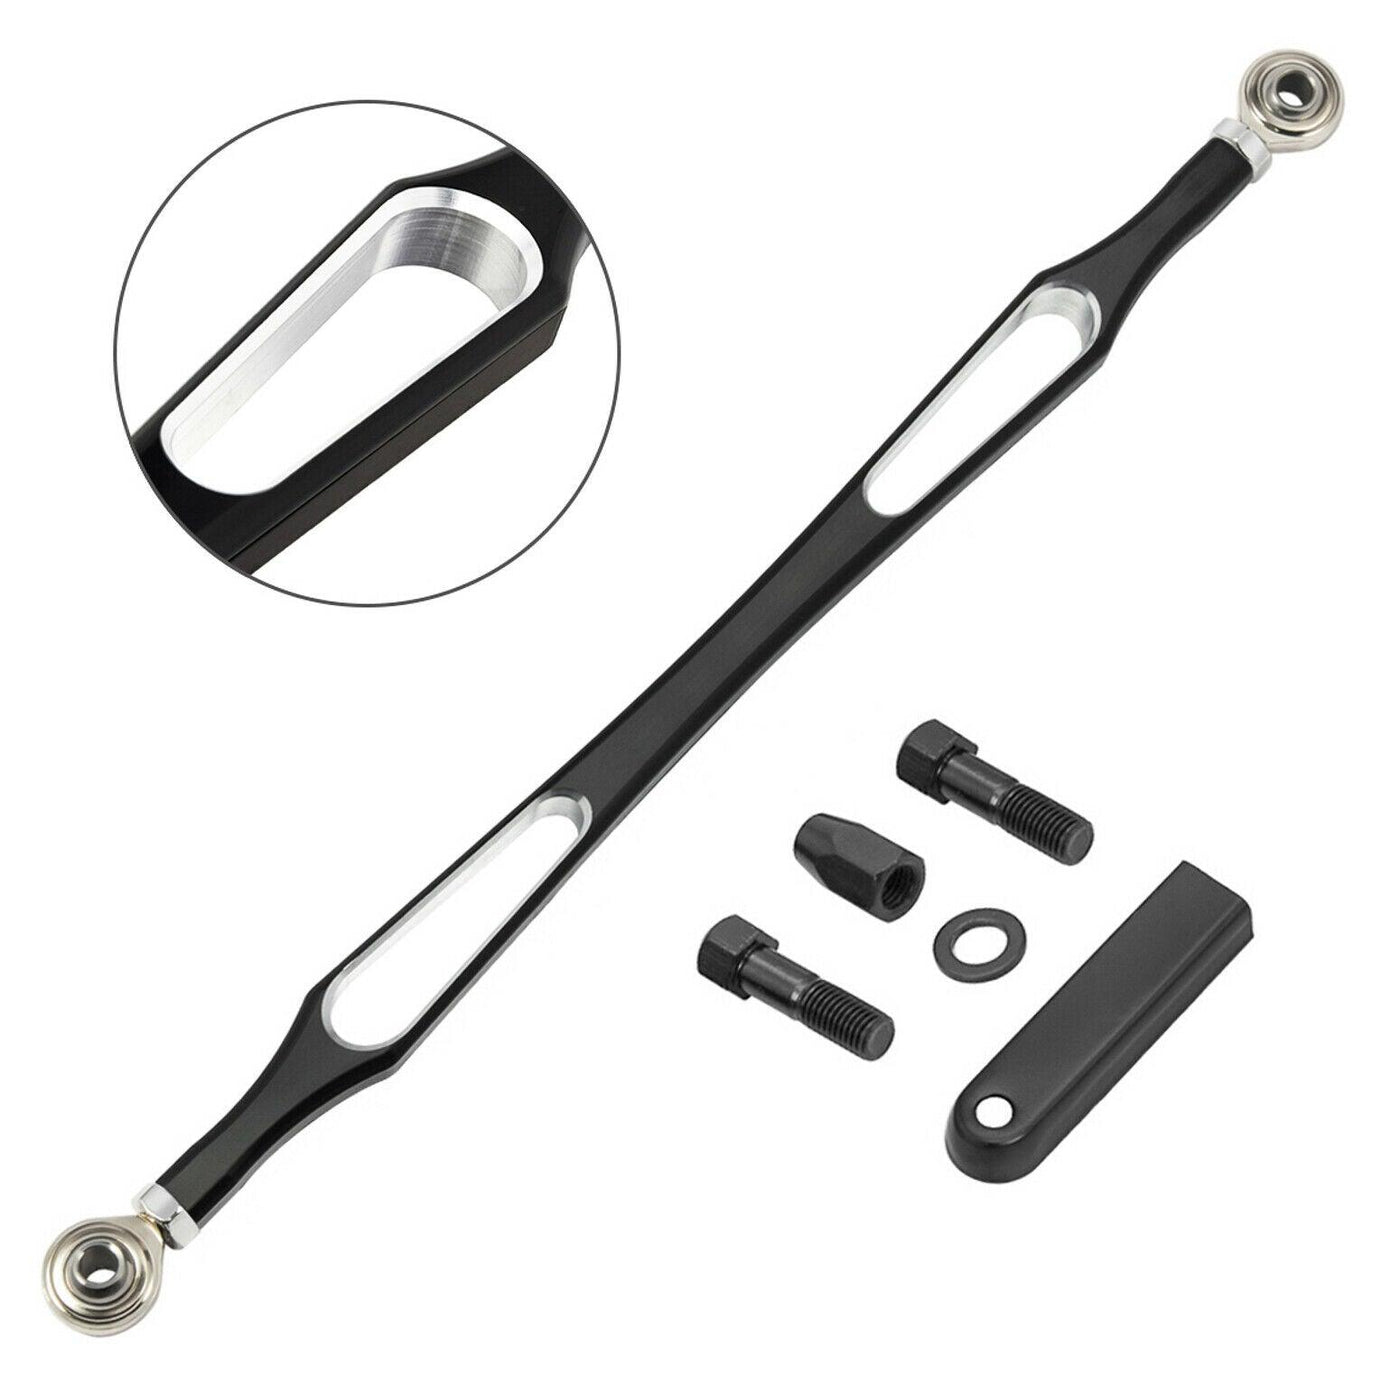 Aluminum Black Shift Linkage Shifter Fit for Harley Touring Softail 1986-2021 - Moto Life Products